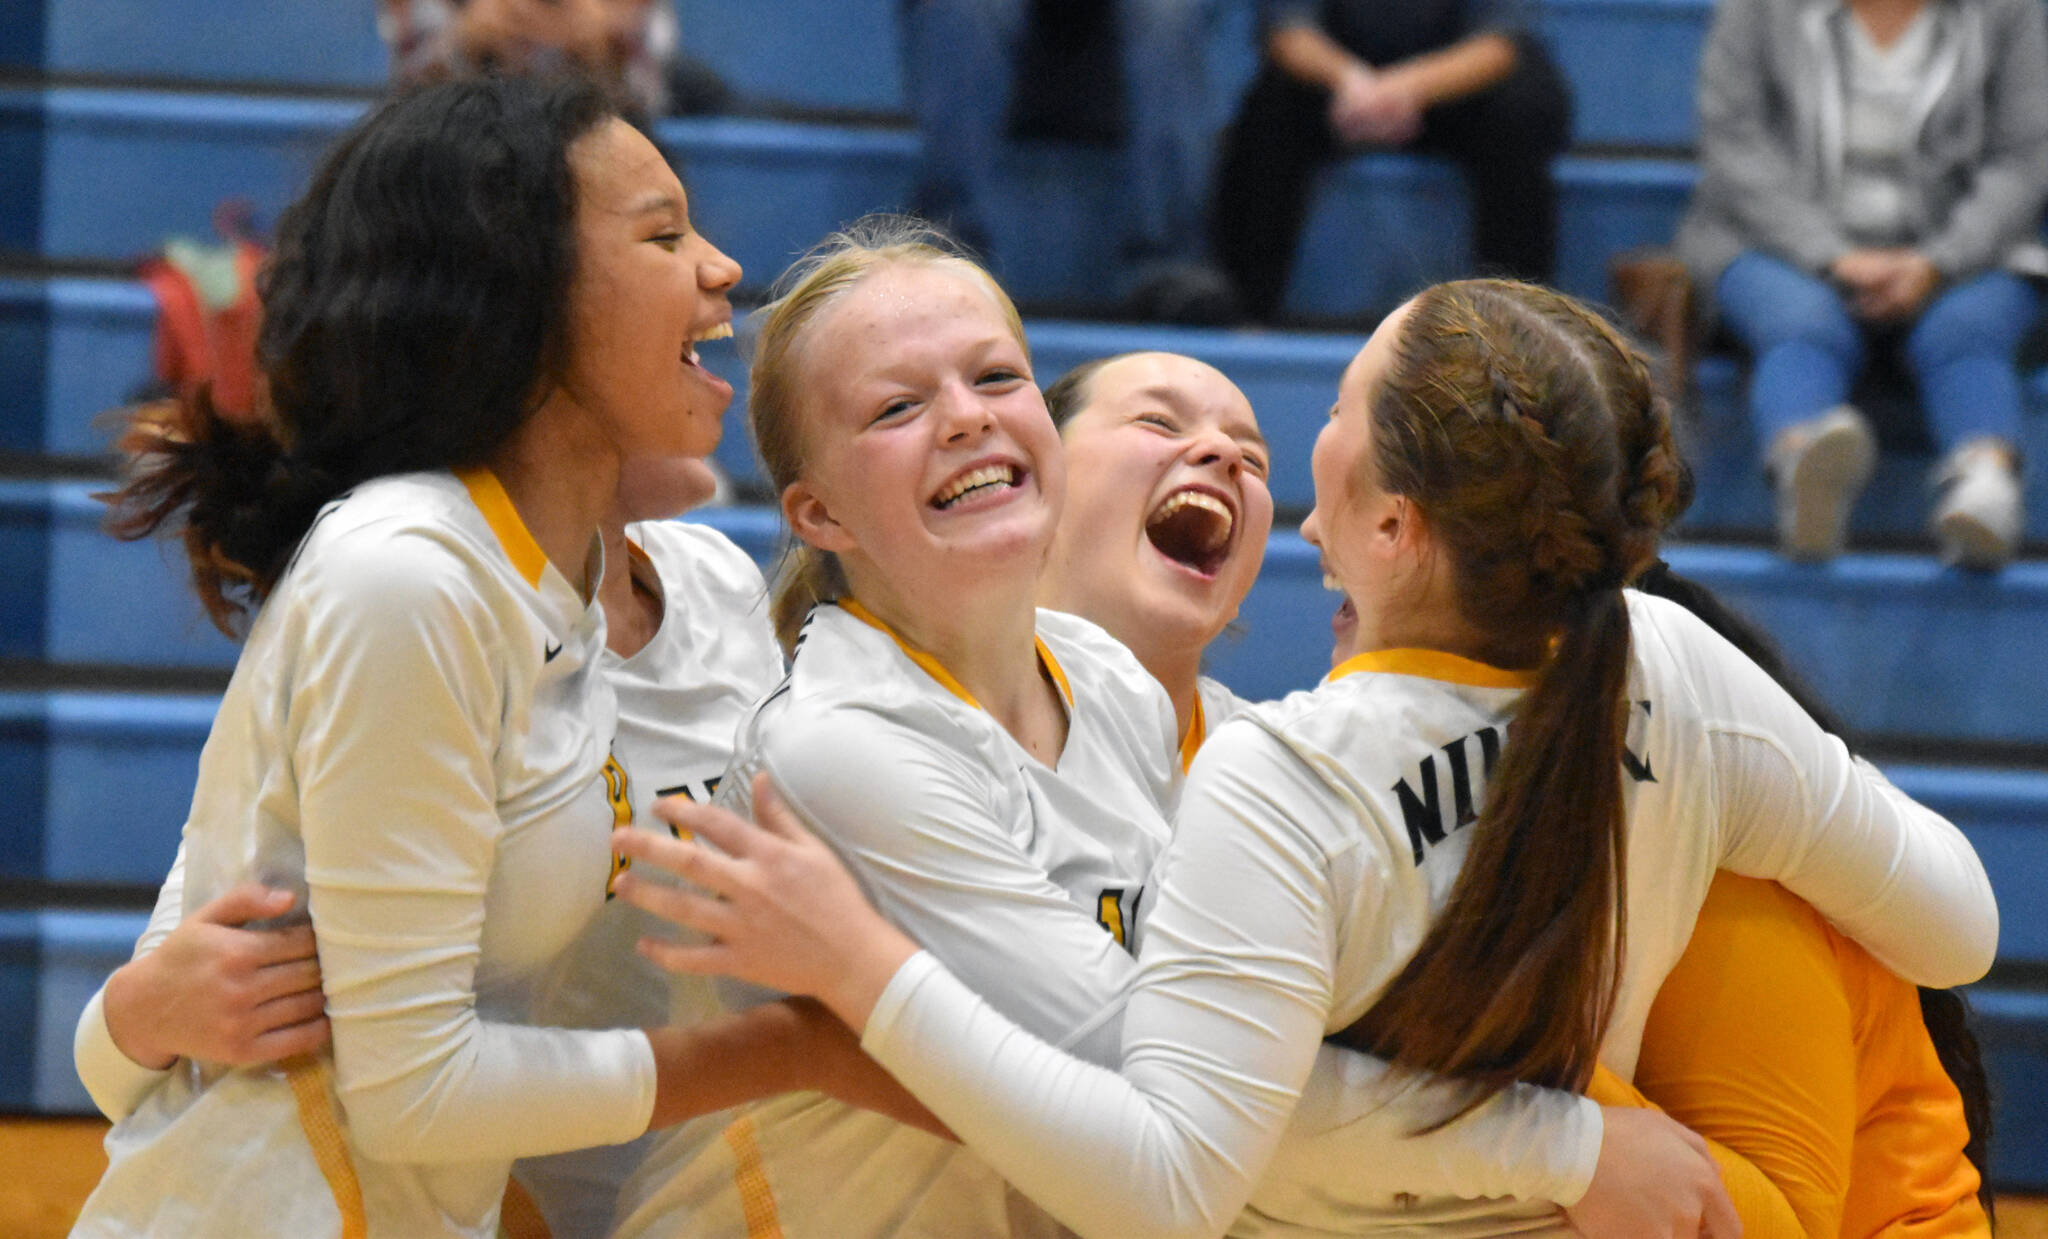 The Nikiski volleyball team celebrates after defeating Soldotna on Thursday, Sept. 8, 2022, at Soldotna High School in Soldotna, Alaska. (Photo by Jake Dye/Peninsula Clarion)